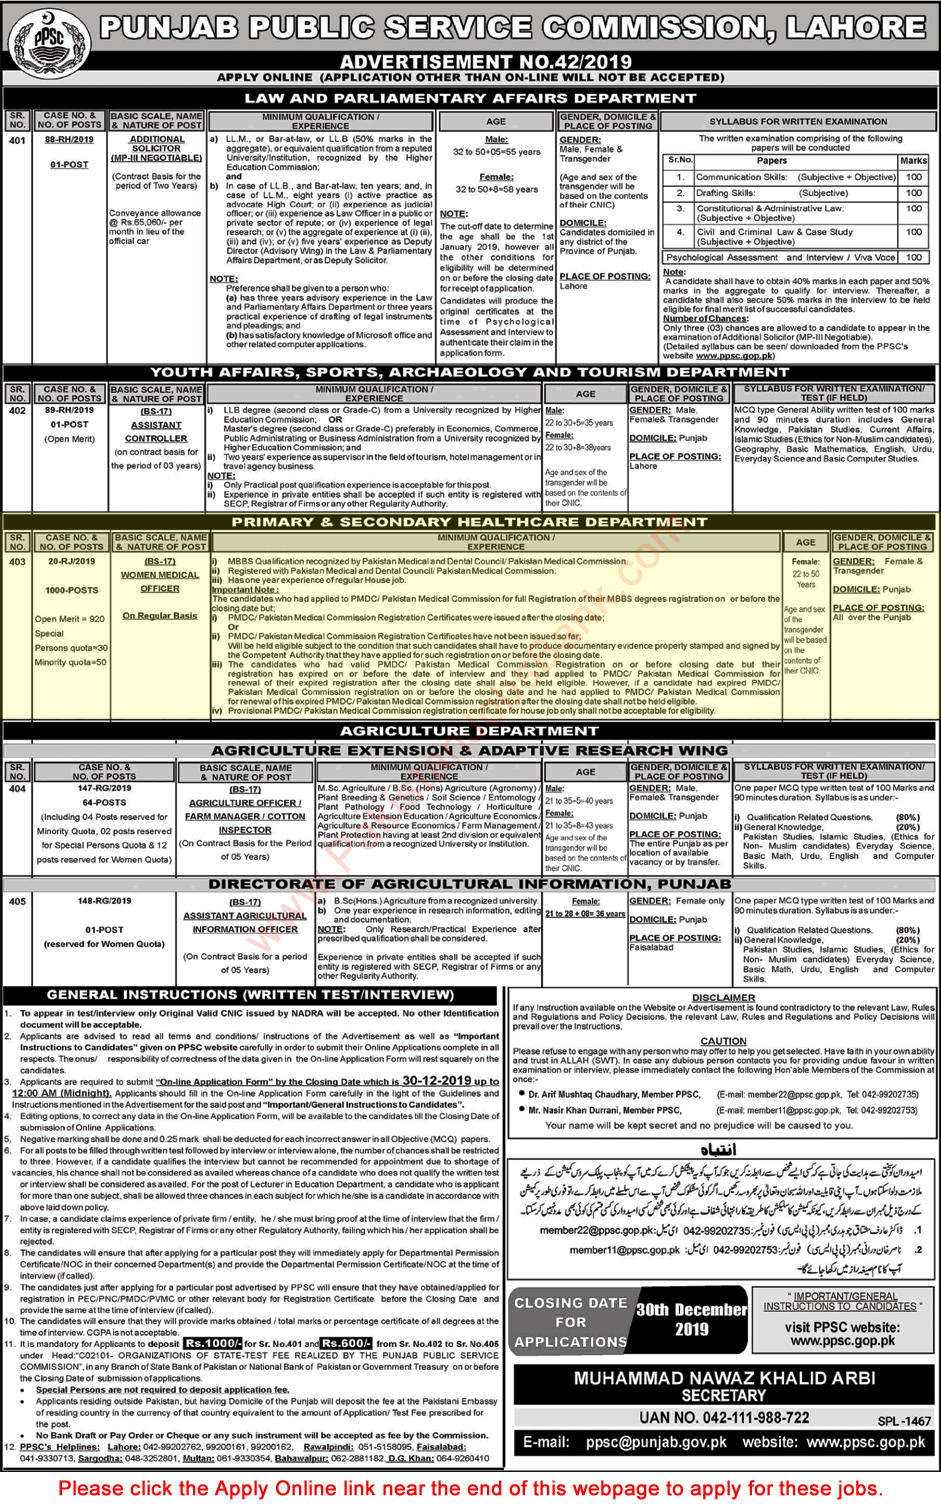 Women Medical Officer Jobs in Primary & Secondary Healthcare Department Punjab December 2019 PPSC Online Apply Latest